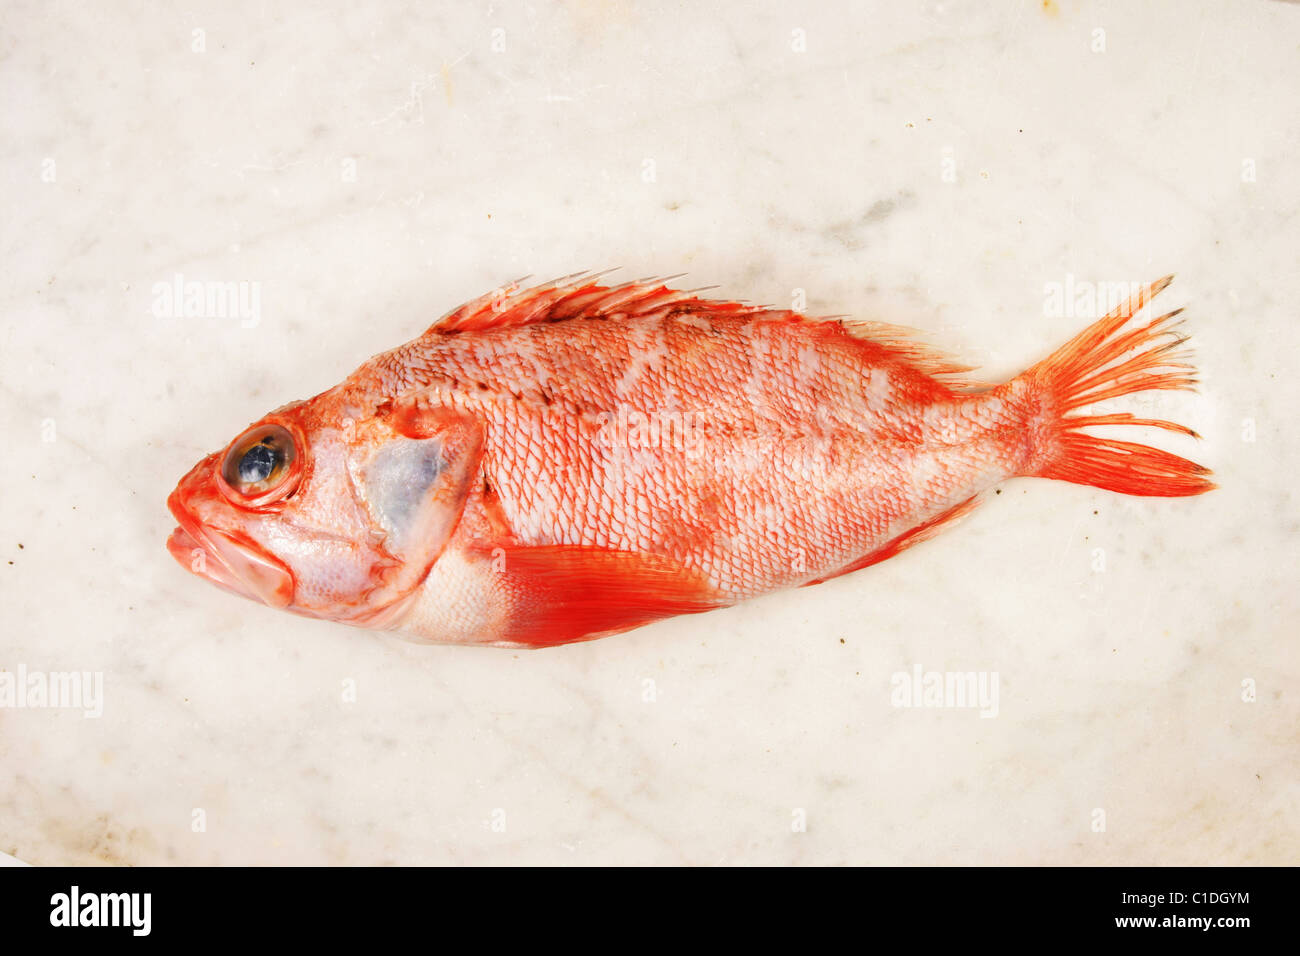 Red fish on marble slab Stock Photo